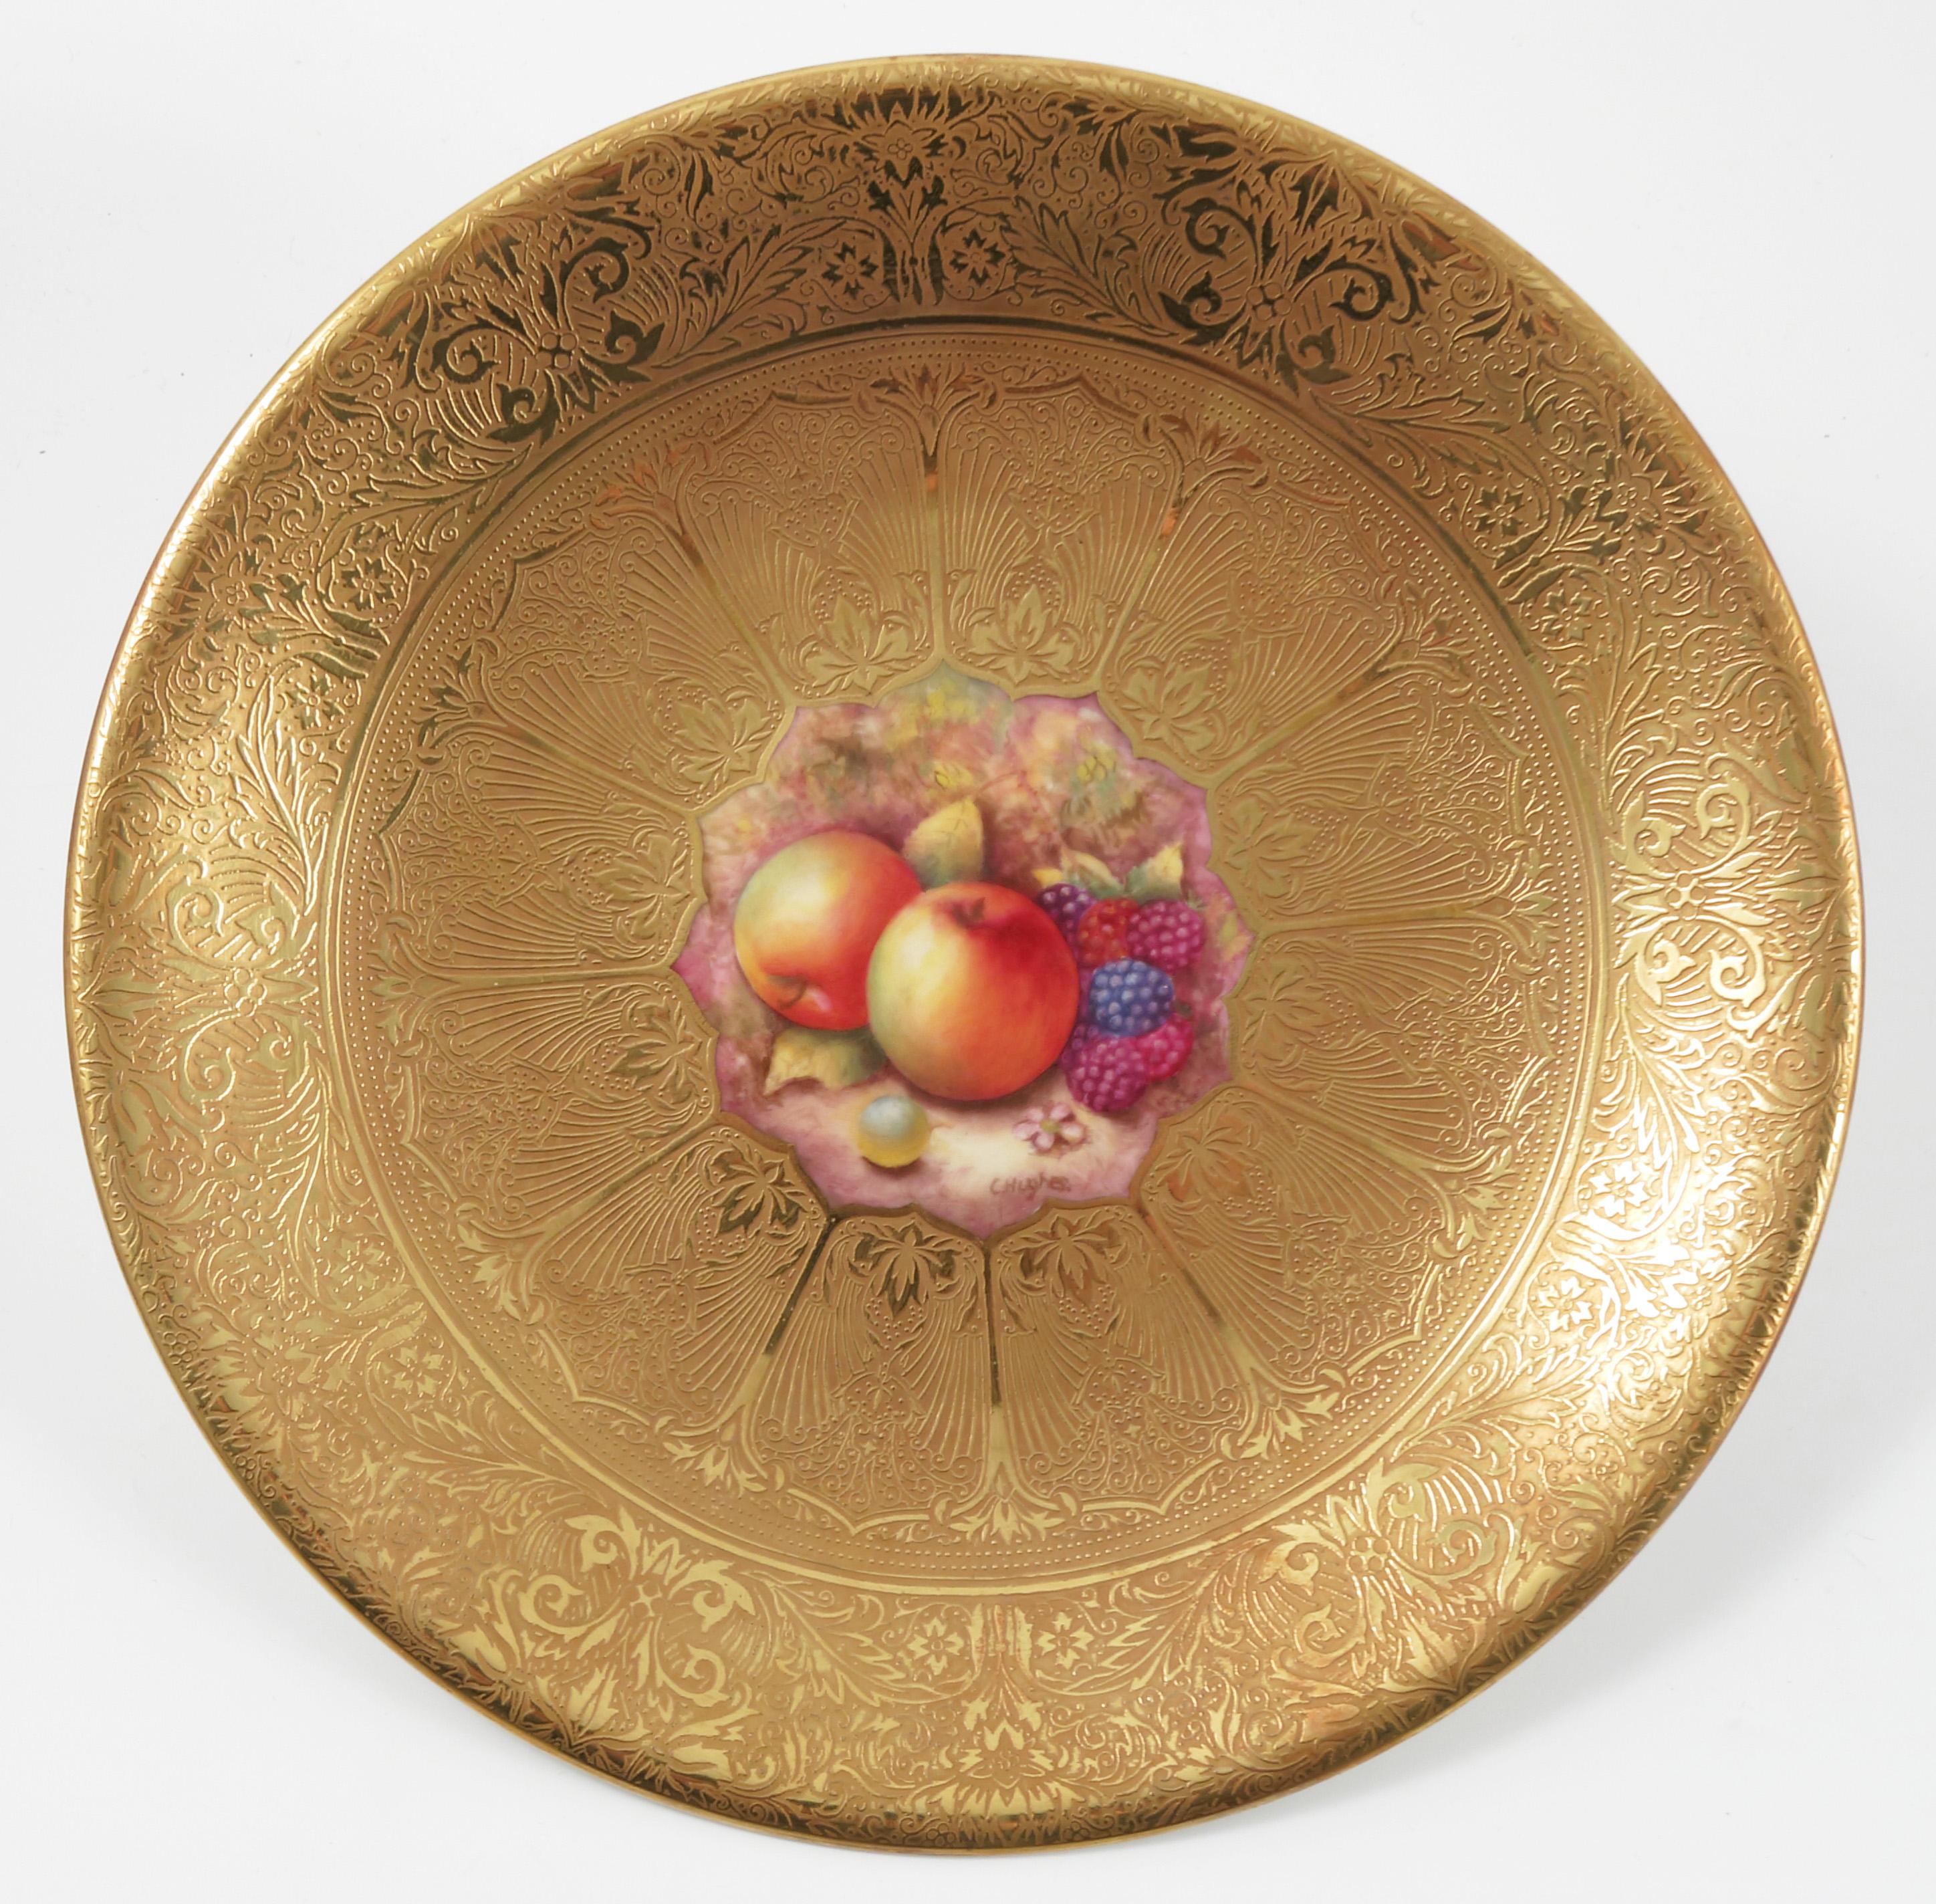 A wonderful pair of Royal Worcester acid gilt plates mid 20th century in date.

Both by Chris Hughes, one decorated with raspberries and apples to the centre the other with blackberries and peaches, both with exqusite gilded decoration.

Both